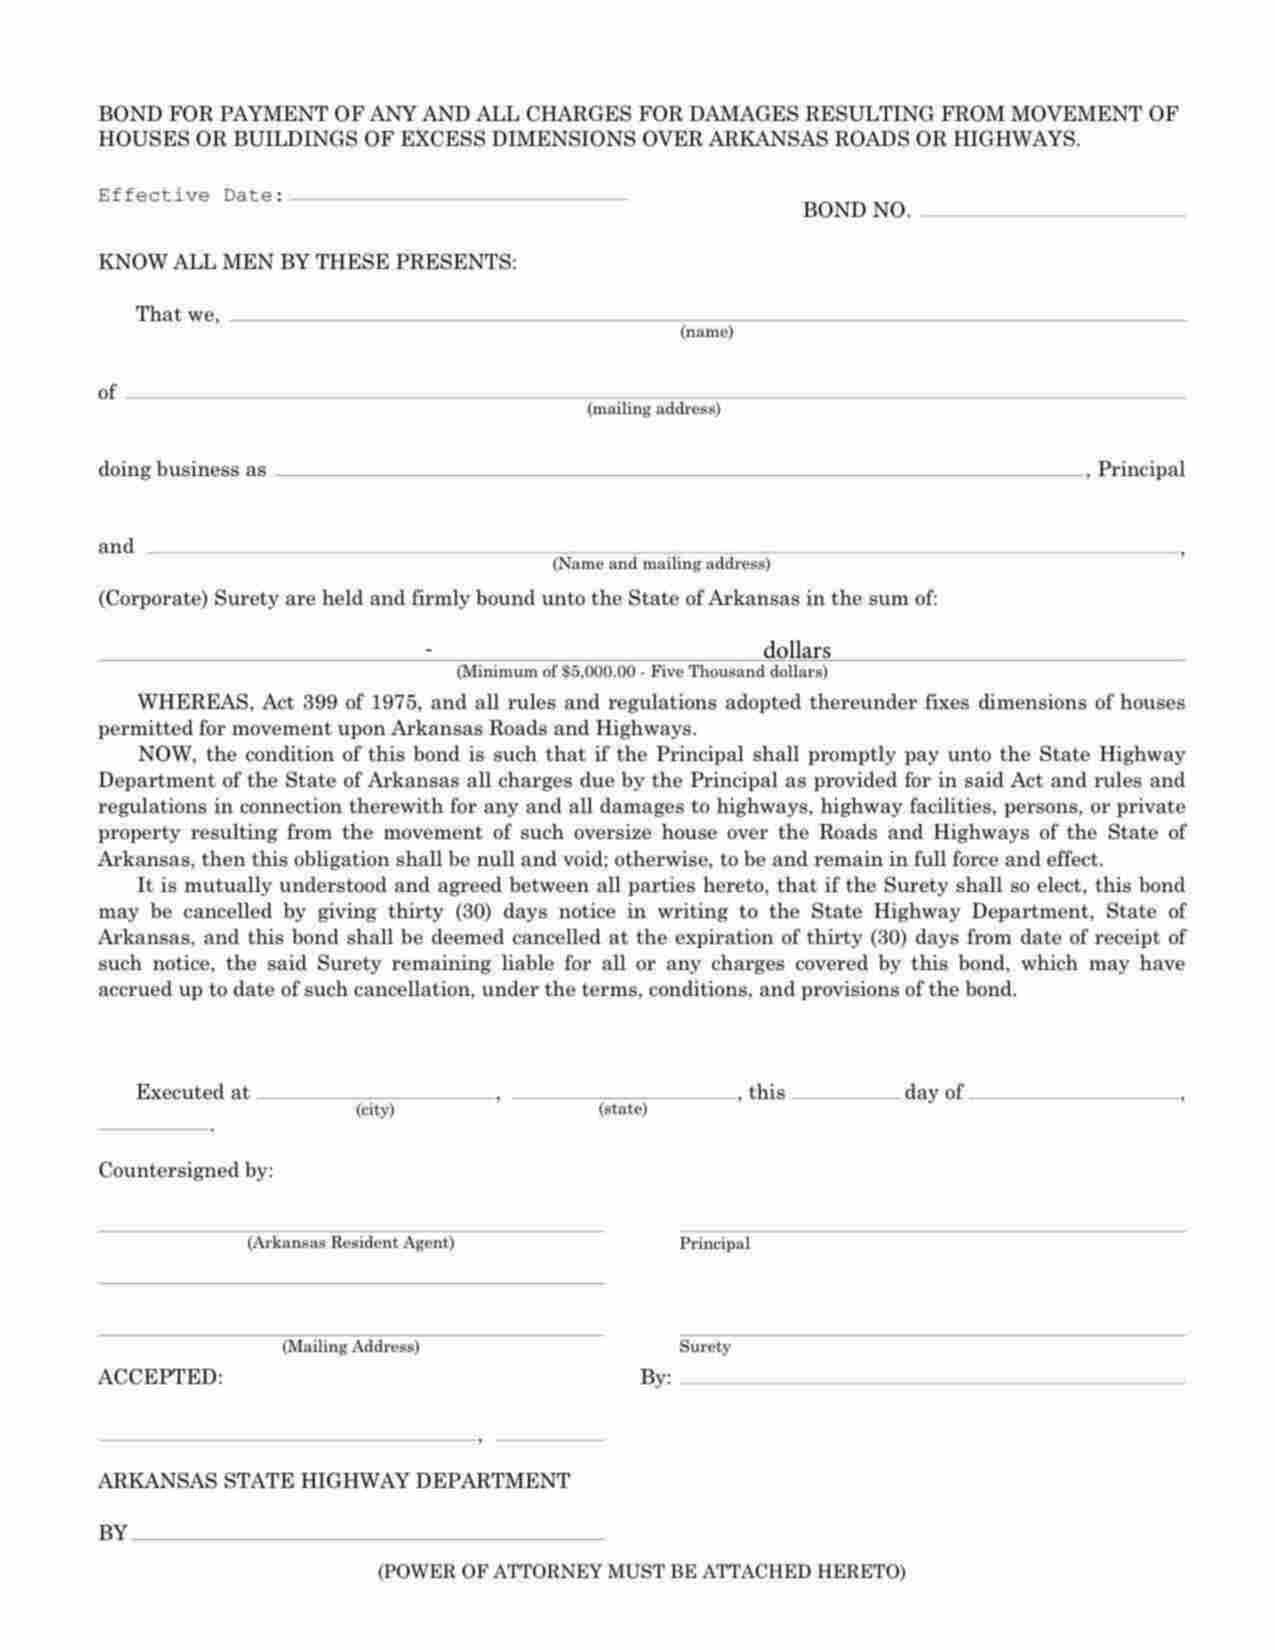 Arkansas Movement of Houses or Buildings of Excess Dimensions Bond Form